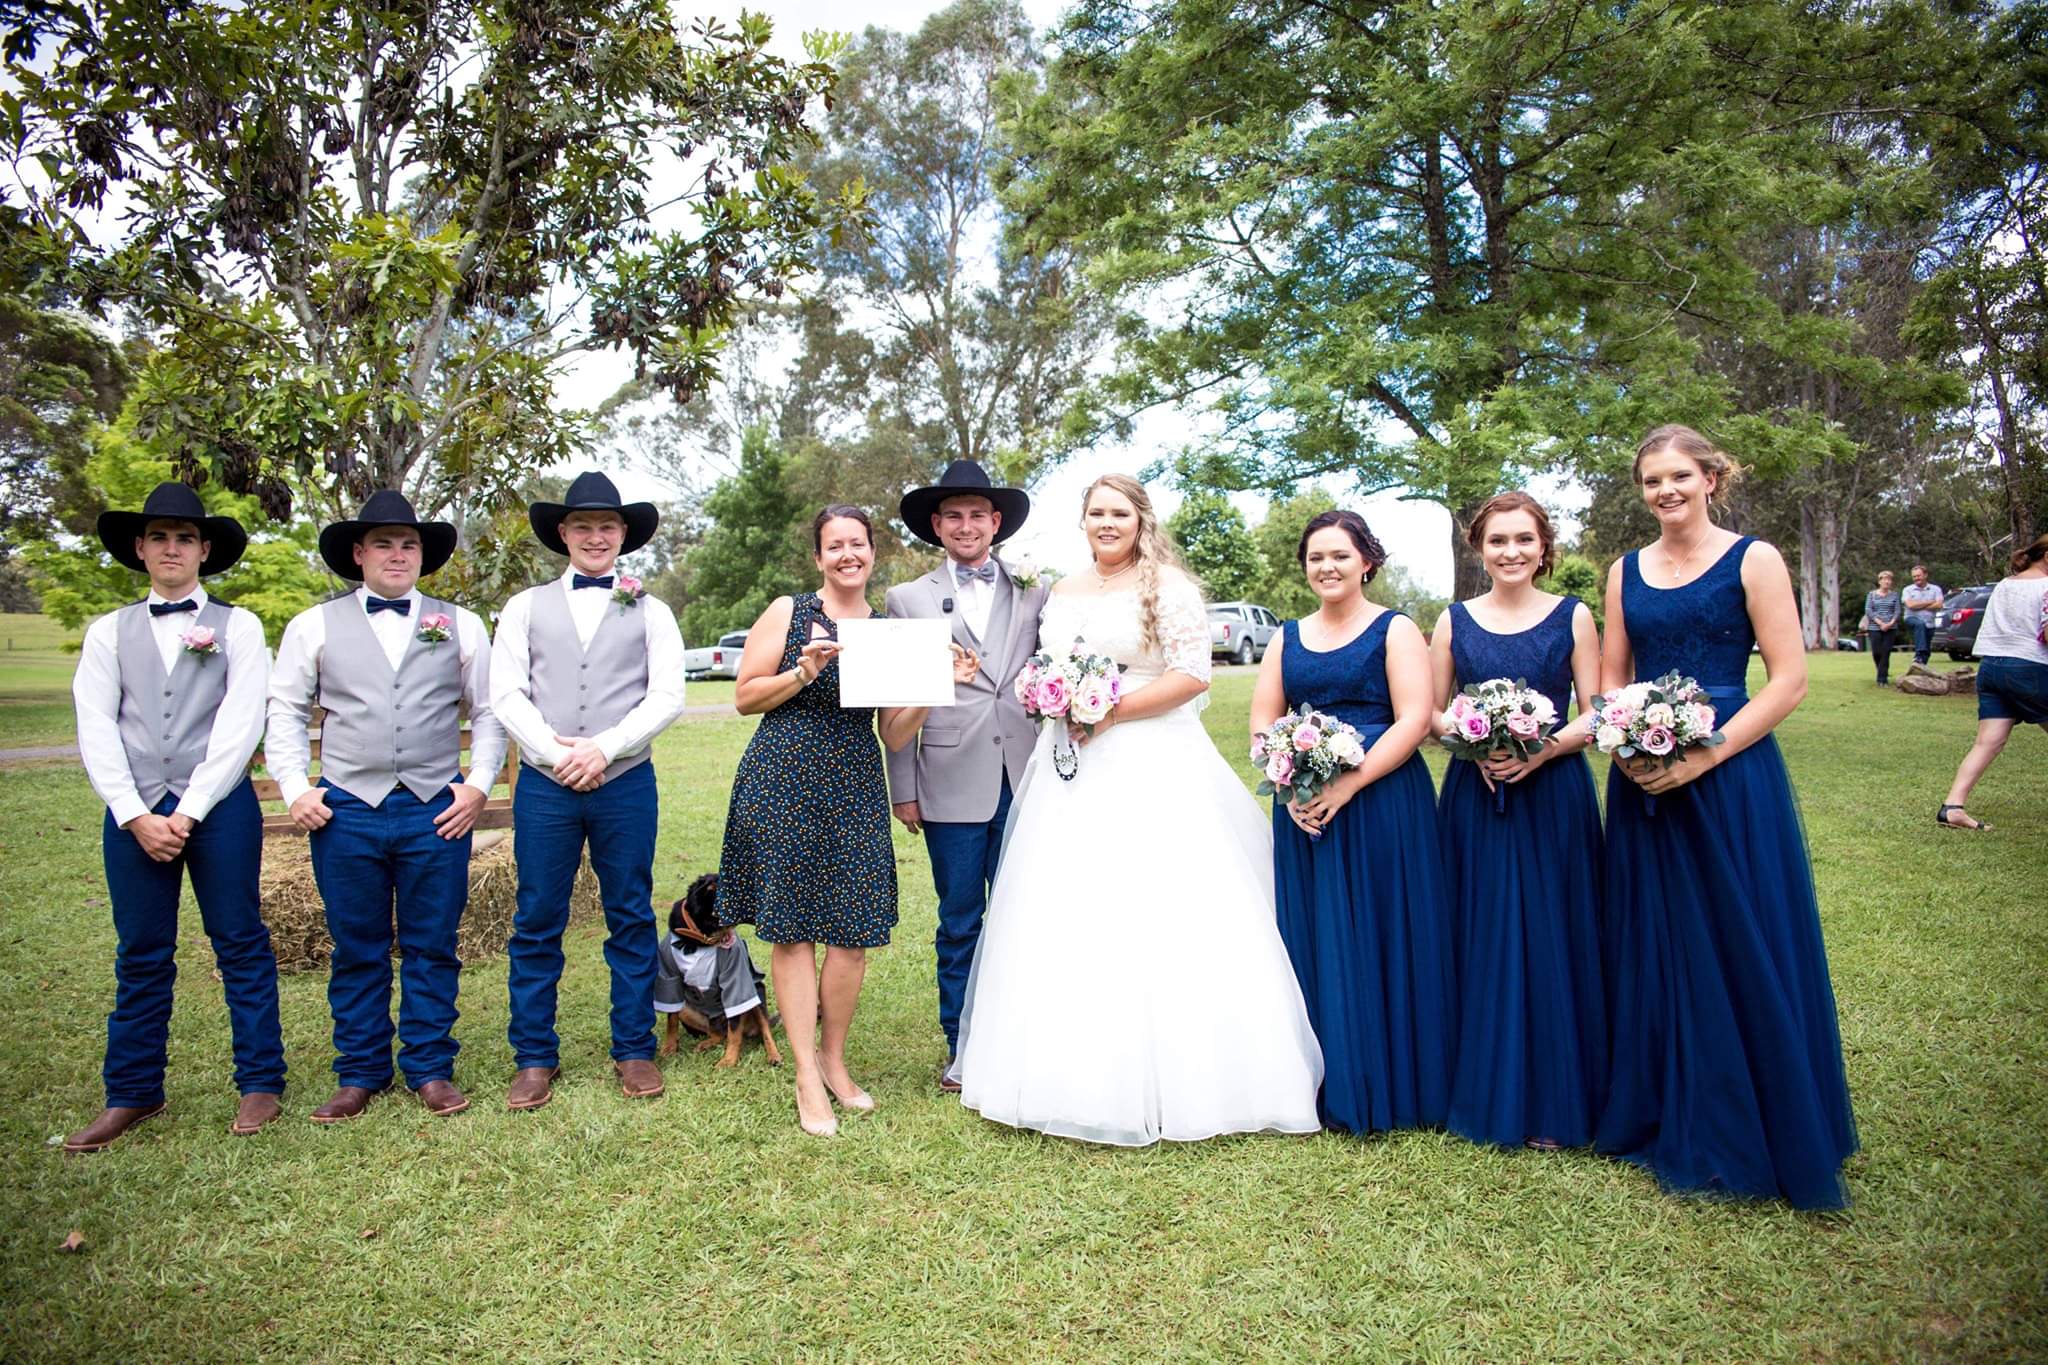 Contact Anouk - Marriage Celebrant in Newcastle Hunter Valley Port Stephens and Lake Macquarie